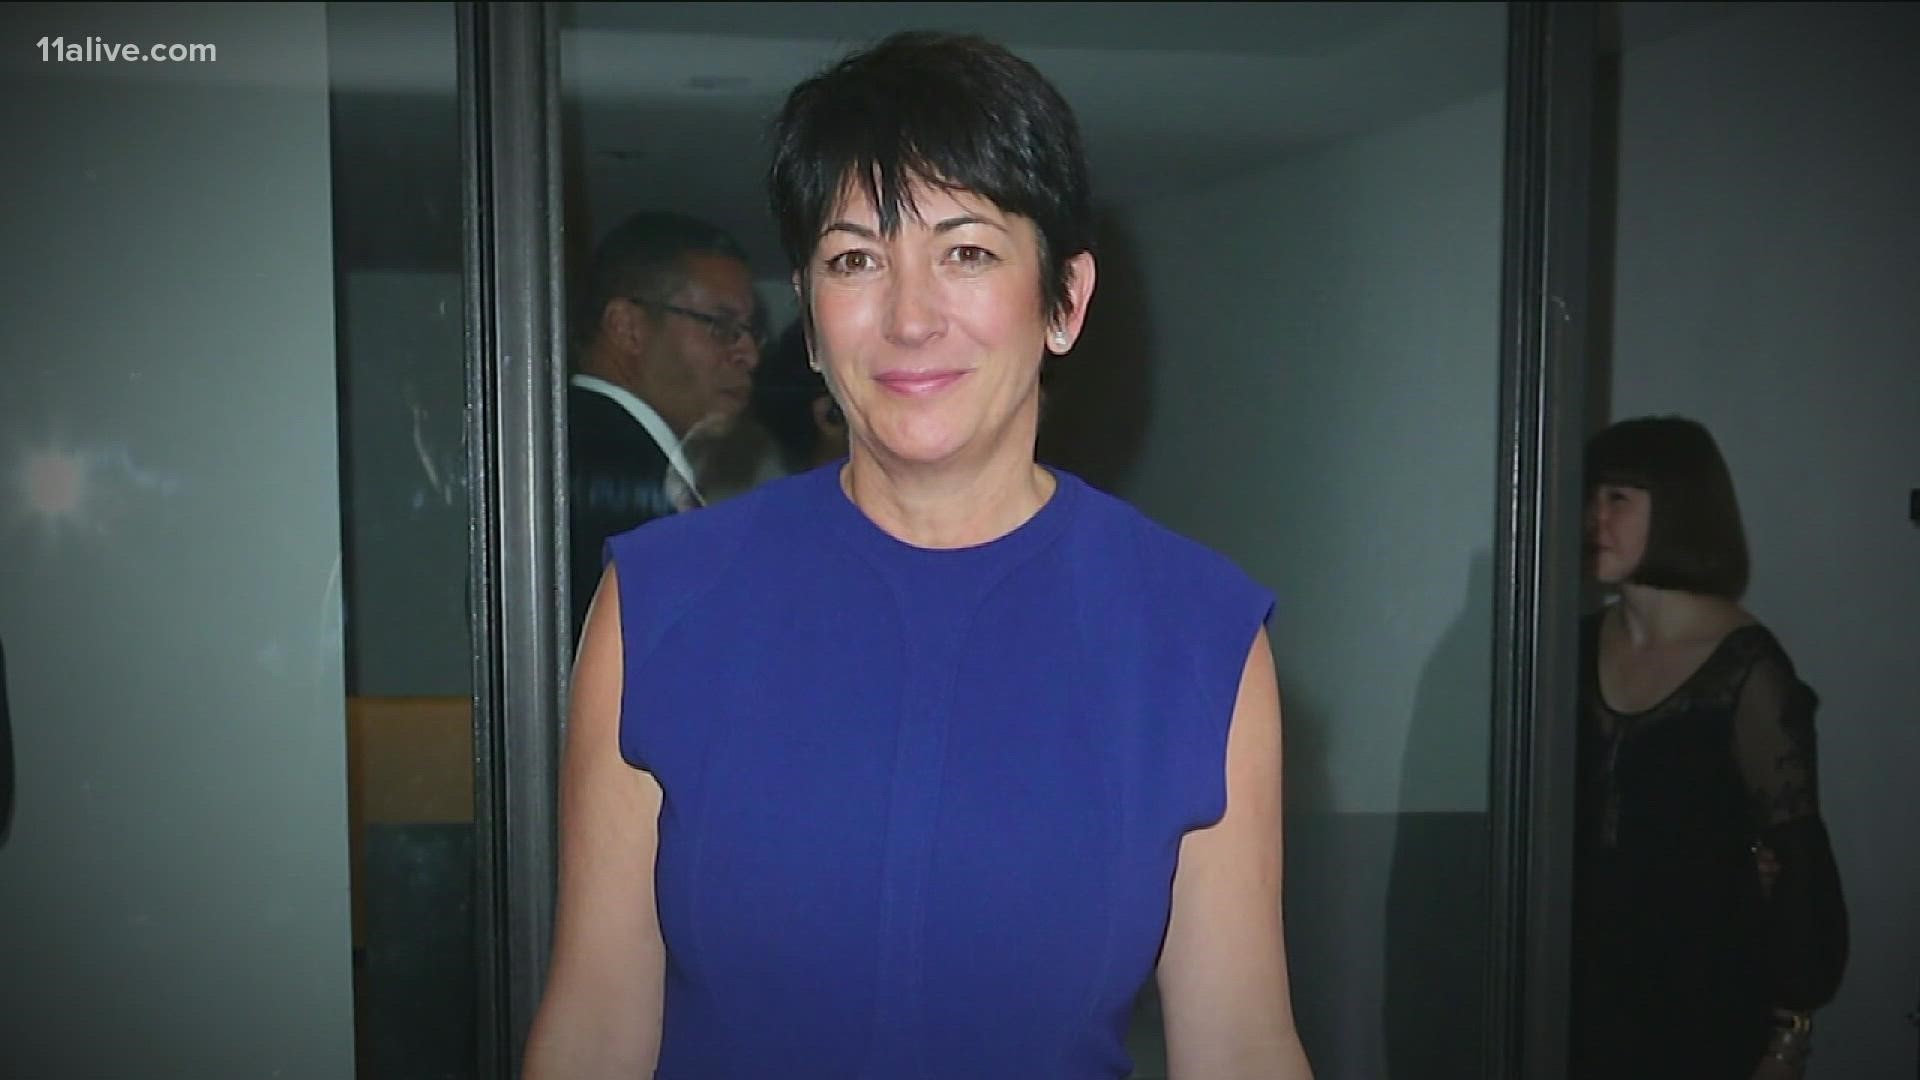 British socialite Ghislaine Maxwell has been convicted of helping lure teenage girls to be sexually abused by the late Jeffrey Epstein.